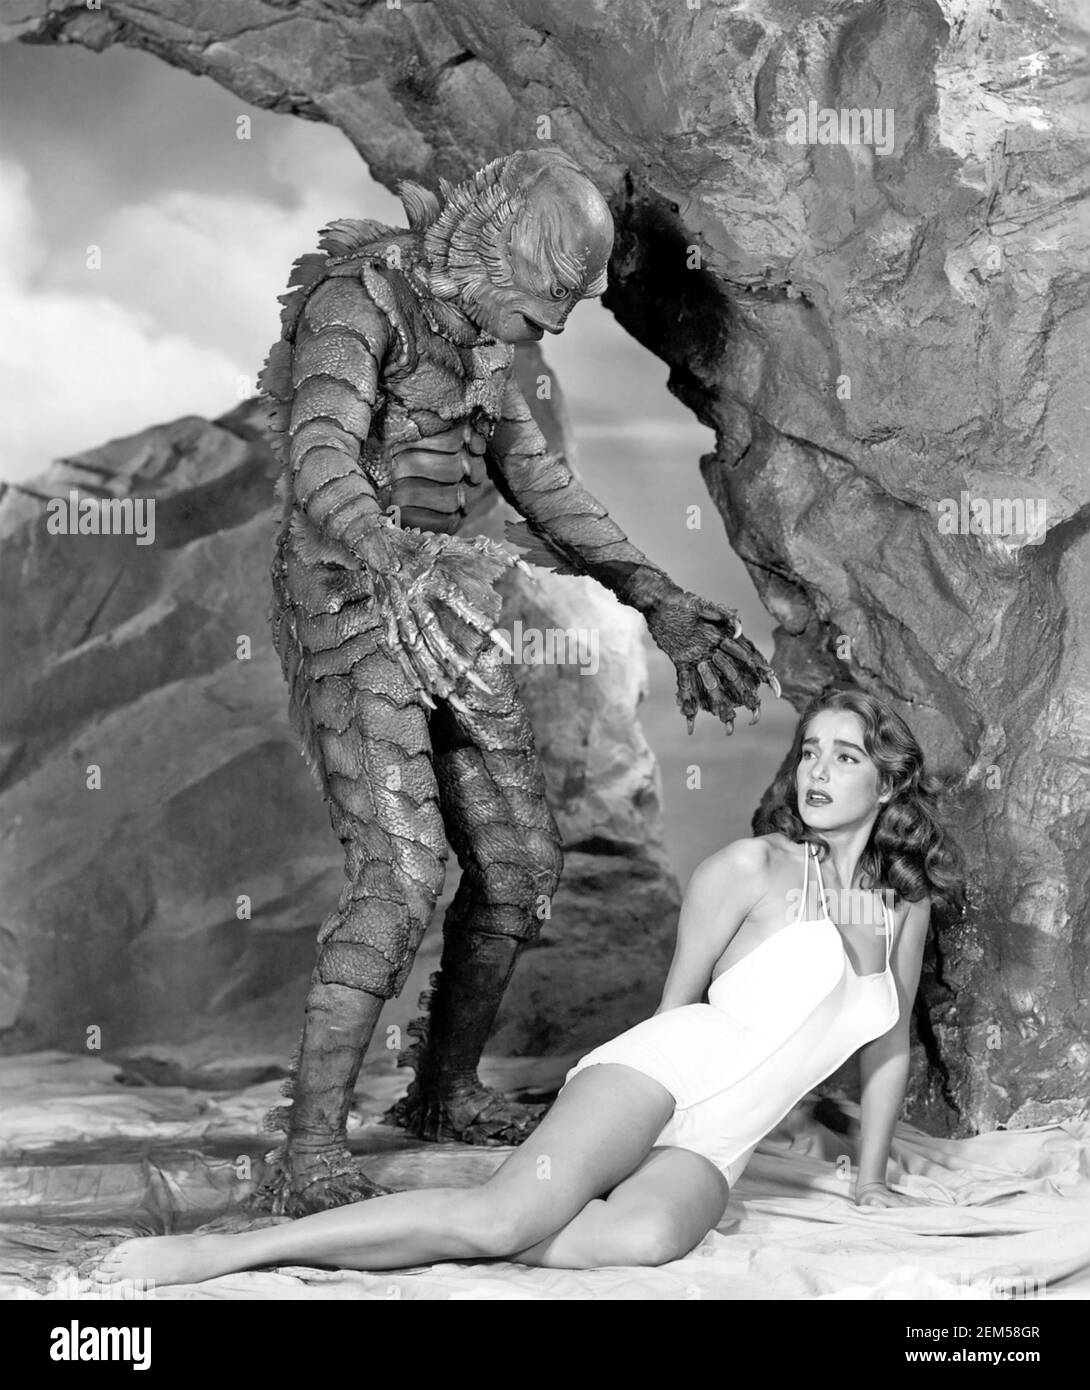 CREATURE FROM THE BLACK LAGOON 1954 Universal-International film with Richard Carlson as the Creature and Julia Adams as Kay Stock Photo